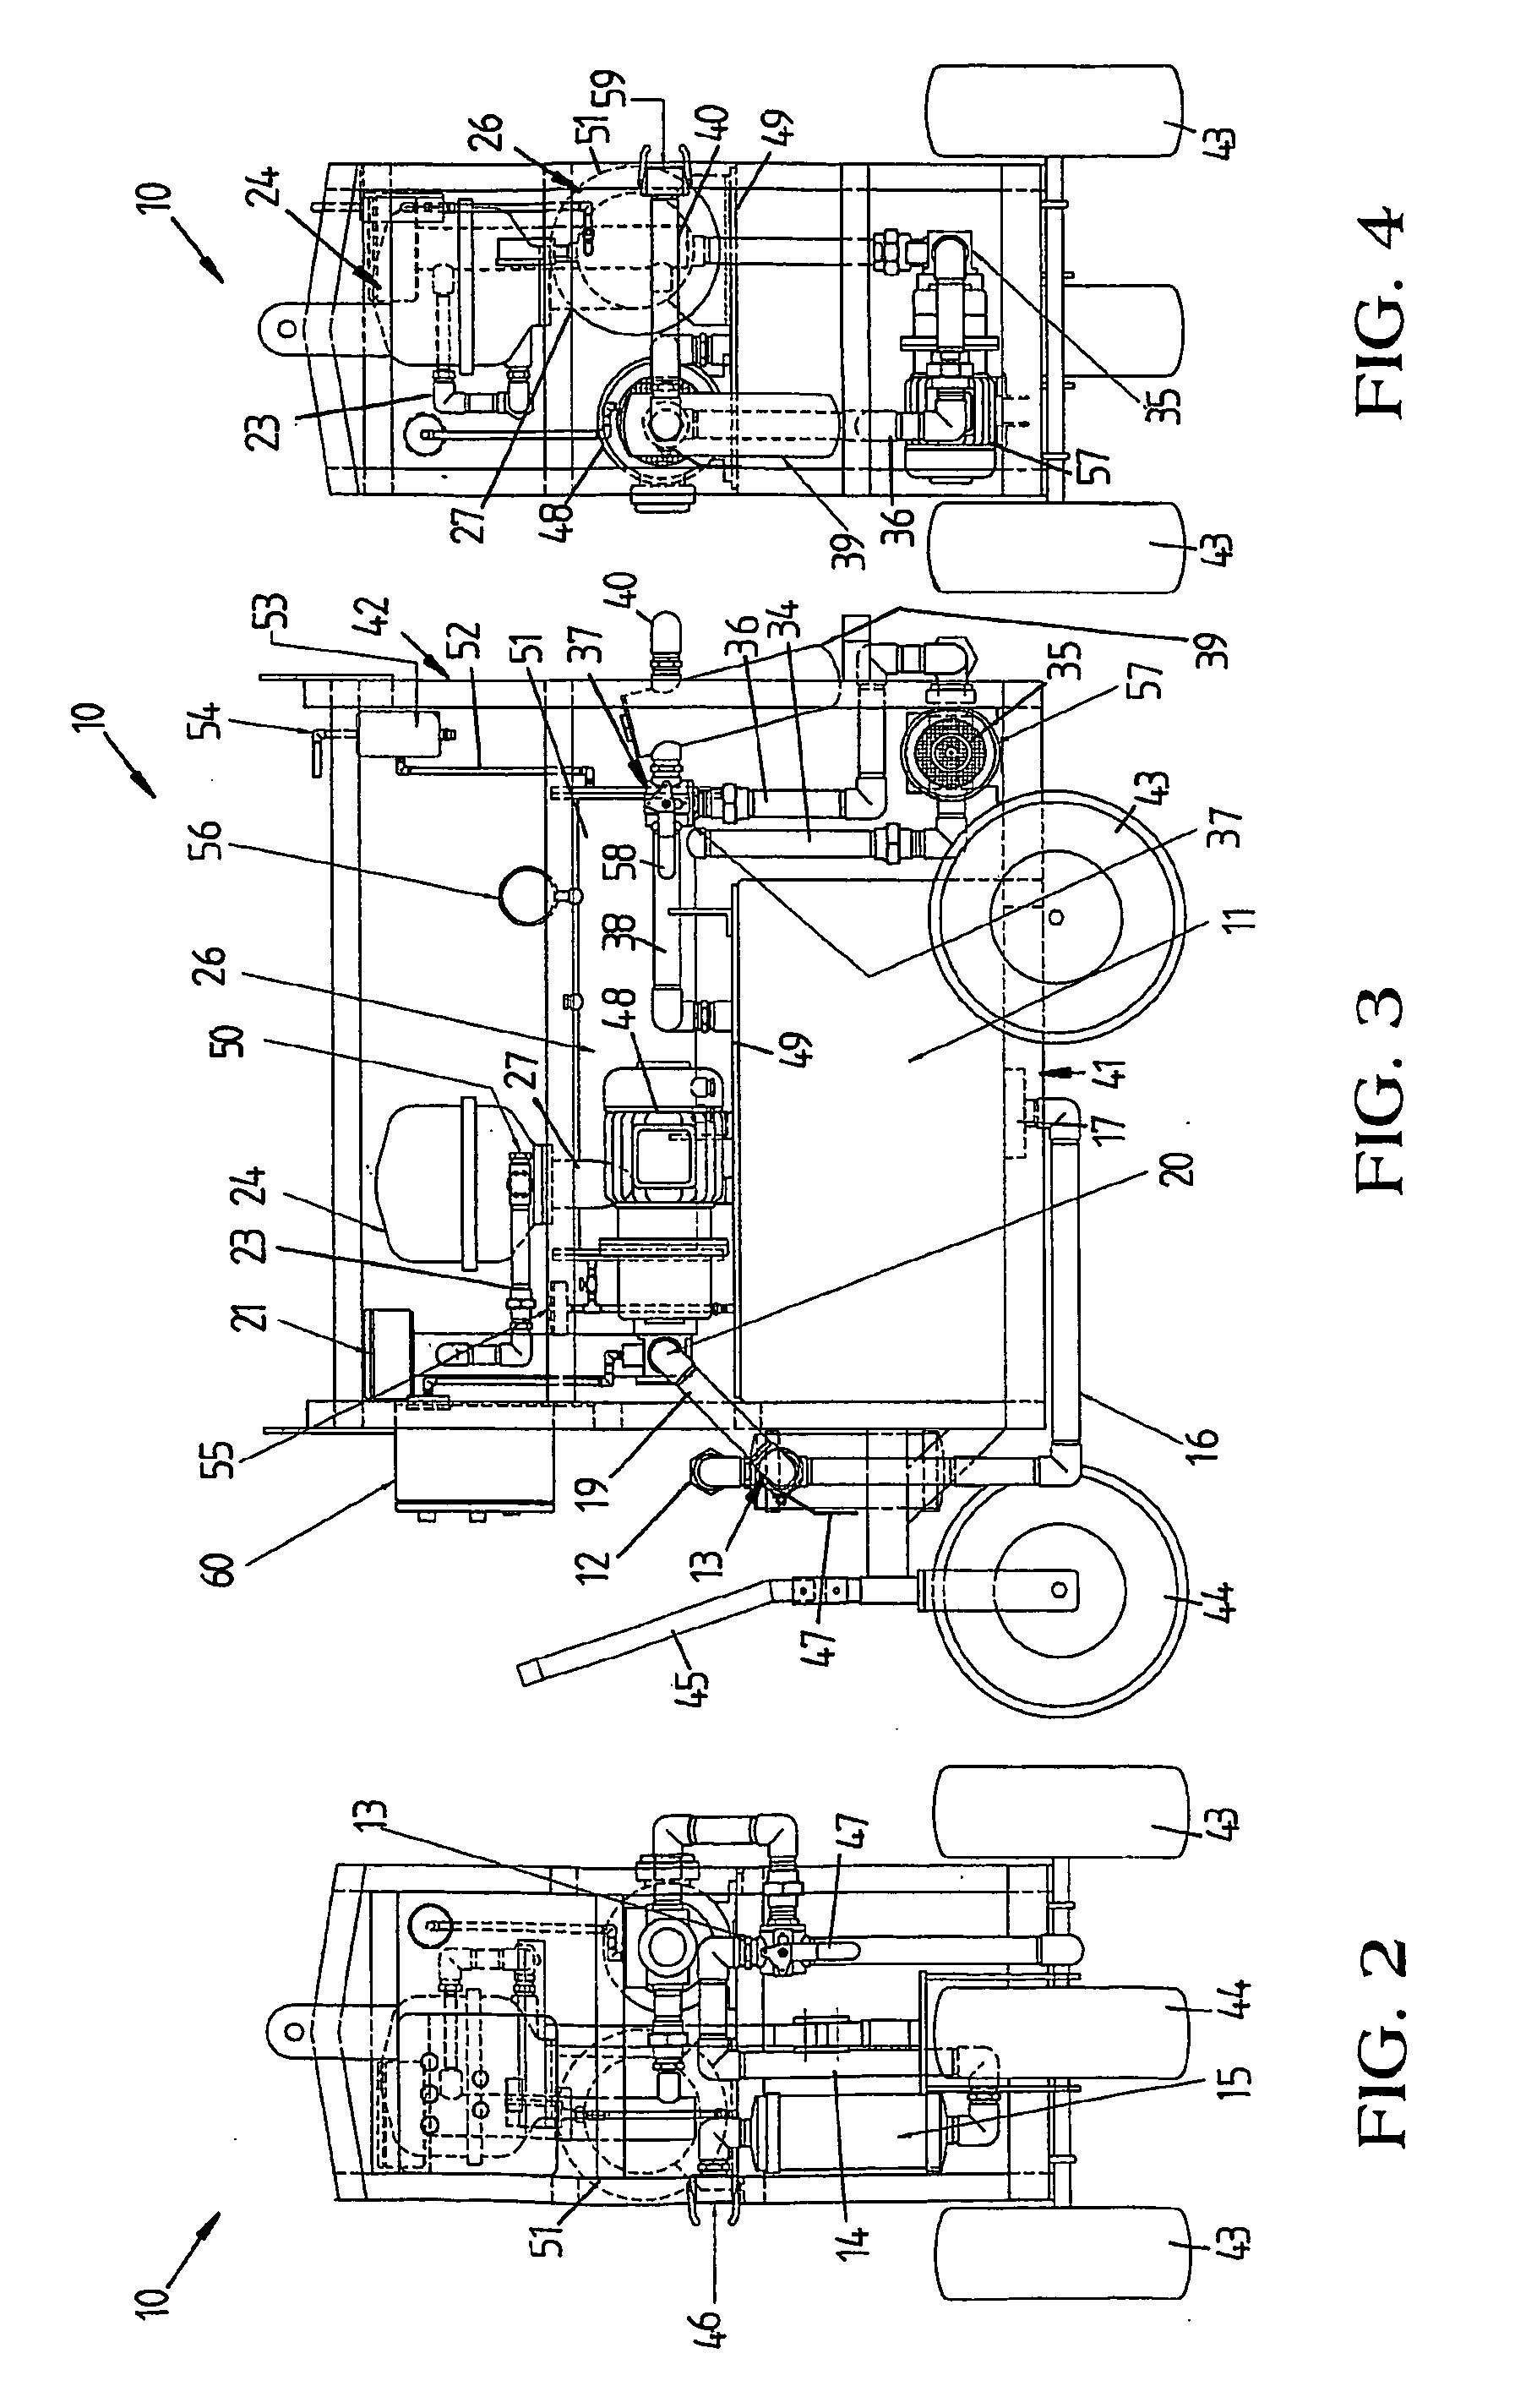 Method and apparatus for cleaning fluids